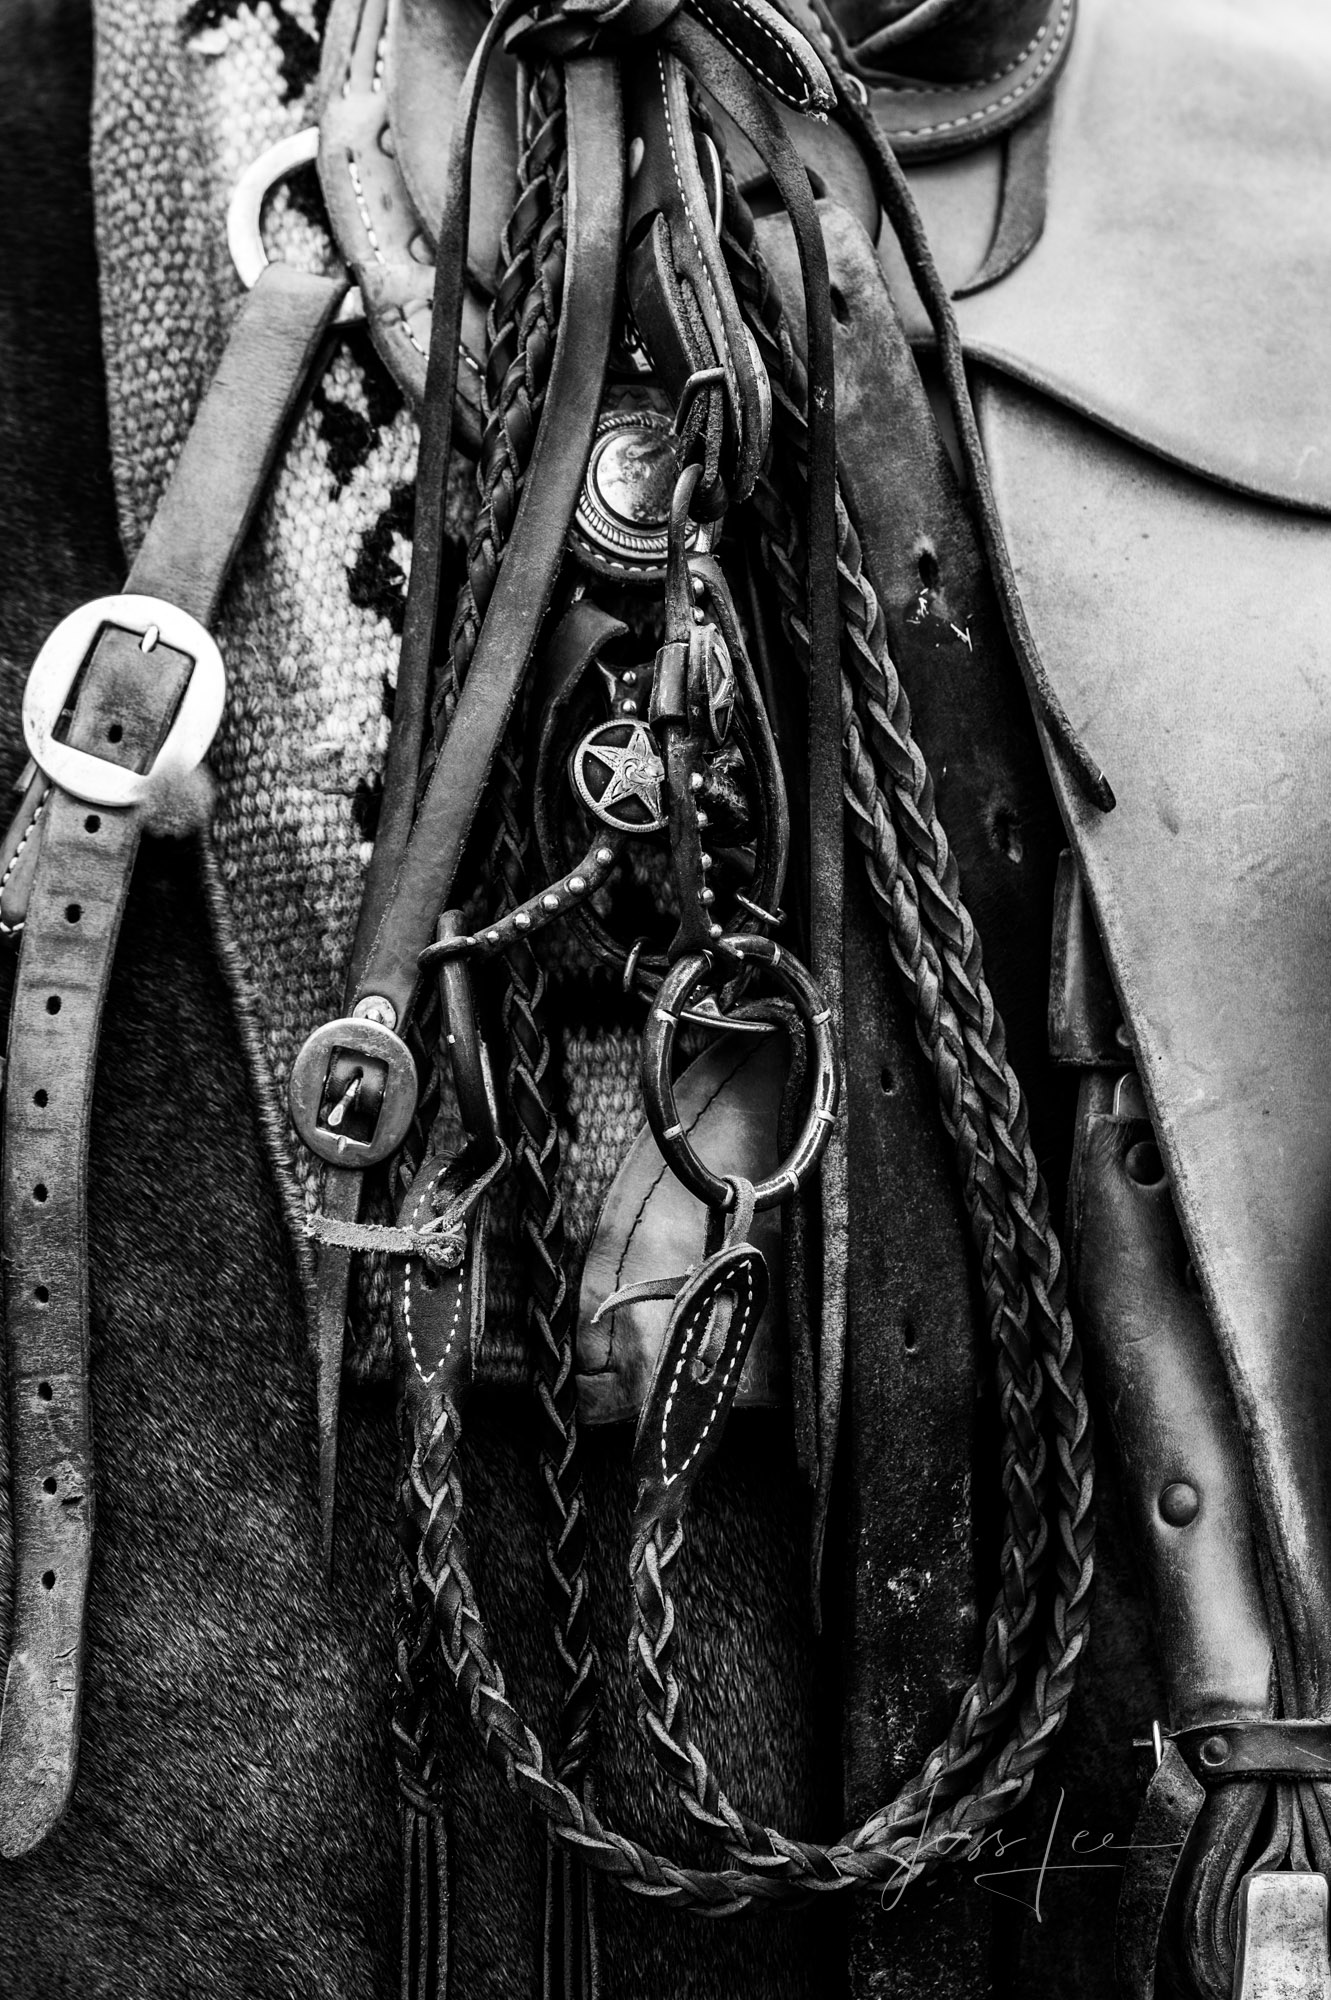 Fine Art Limited Edition Photo Prints of Cowboys, Horses, and life in the West. Braids. A Cowboy picture in black and white....